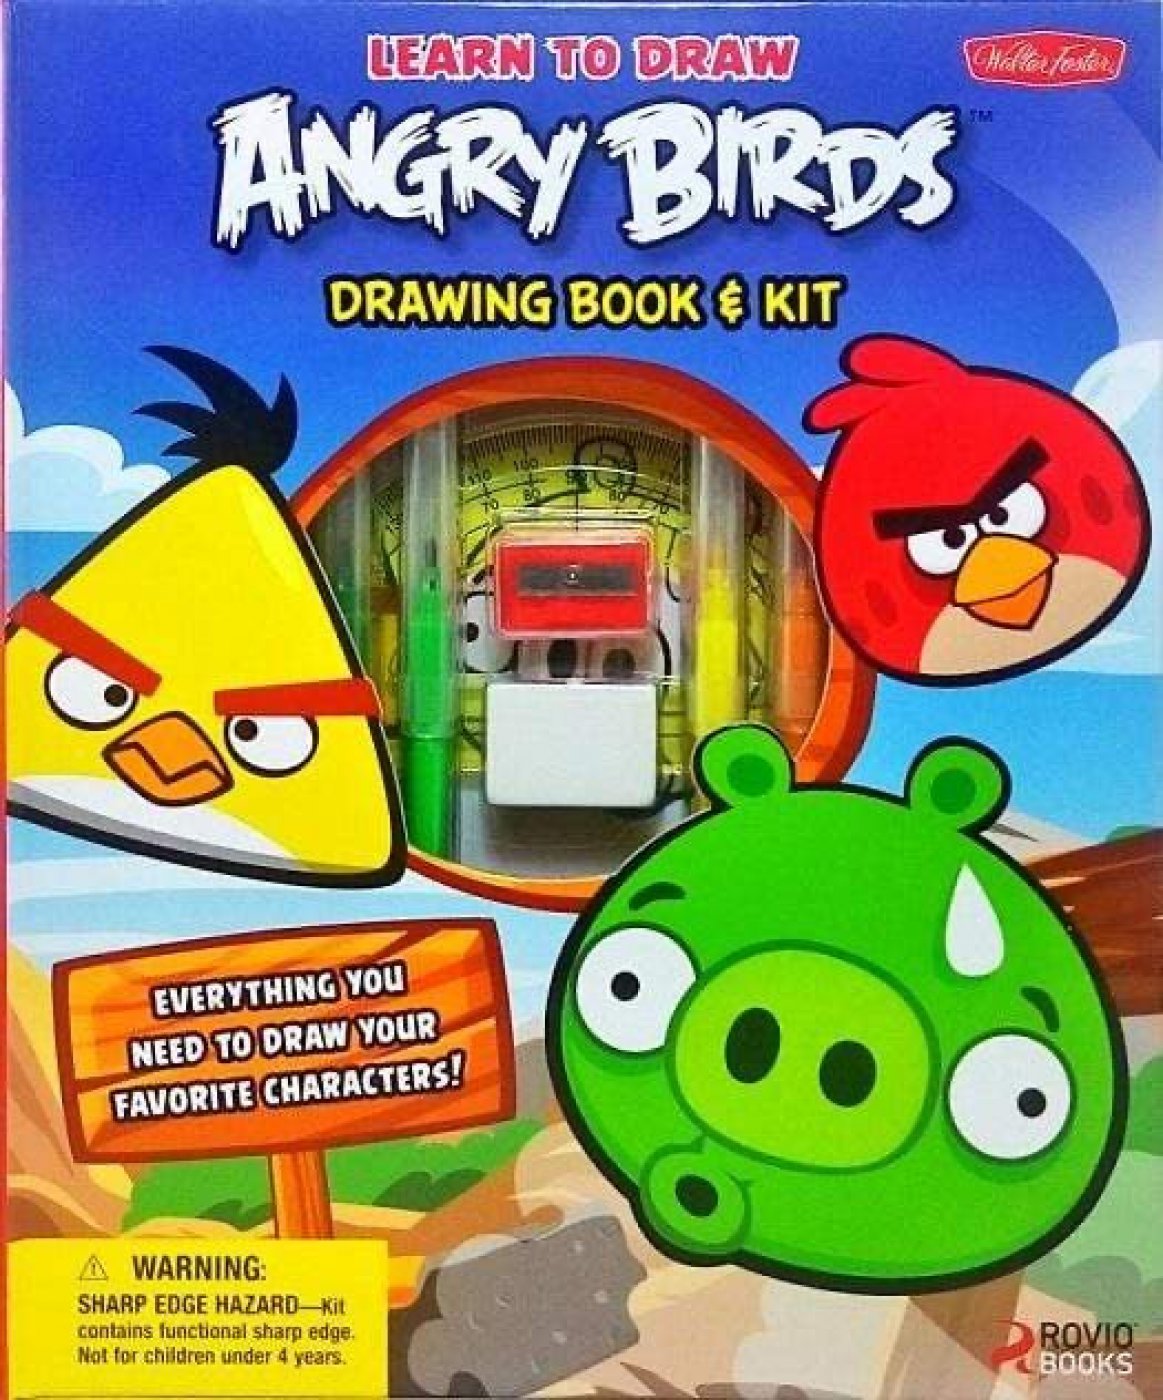 How to draw angry birds step by step tutorial in pictures-saigonsouth.com.vn